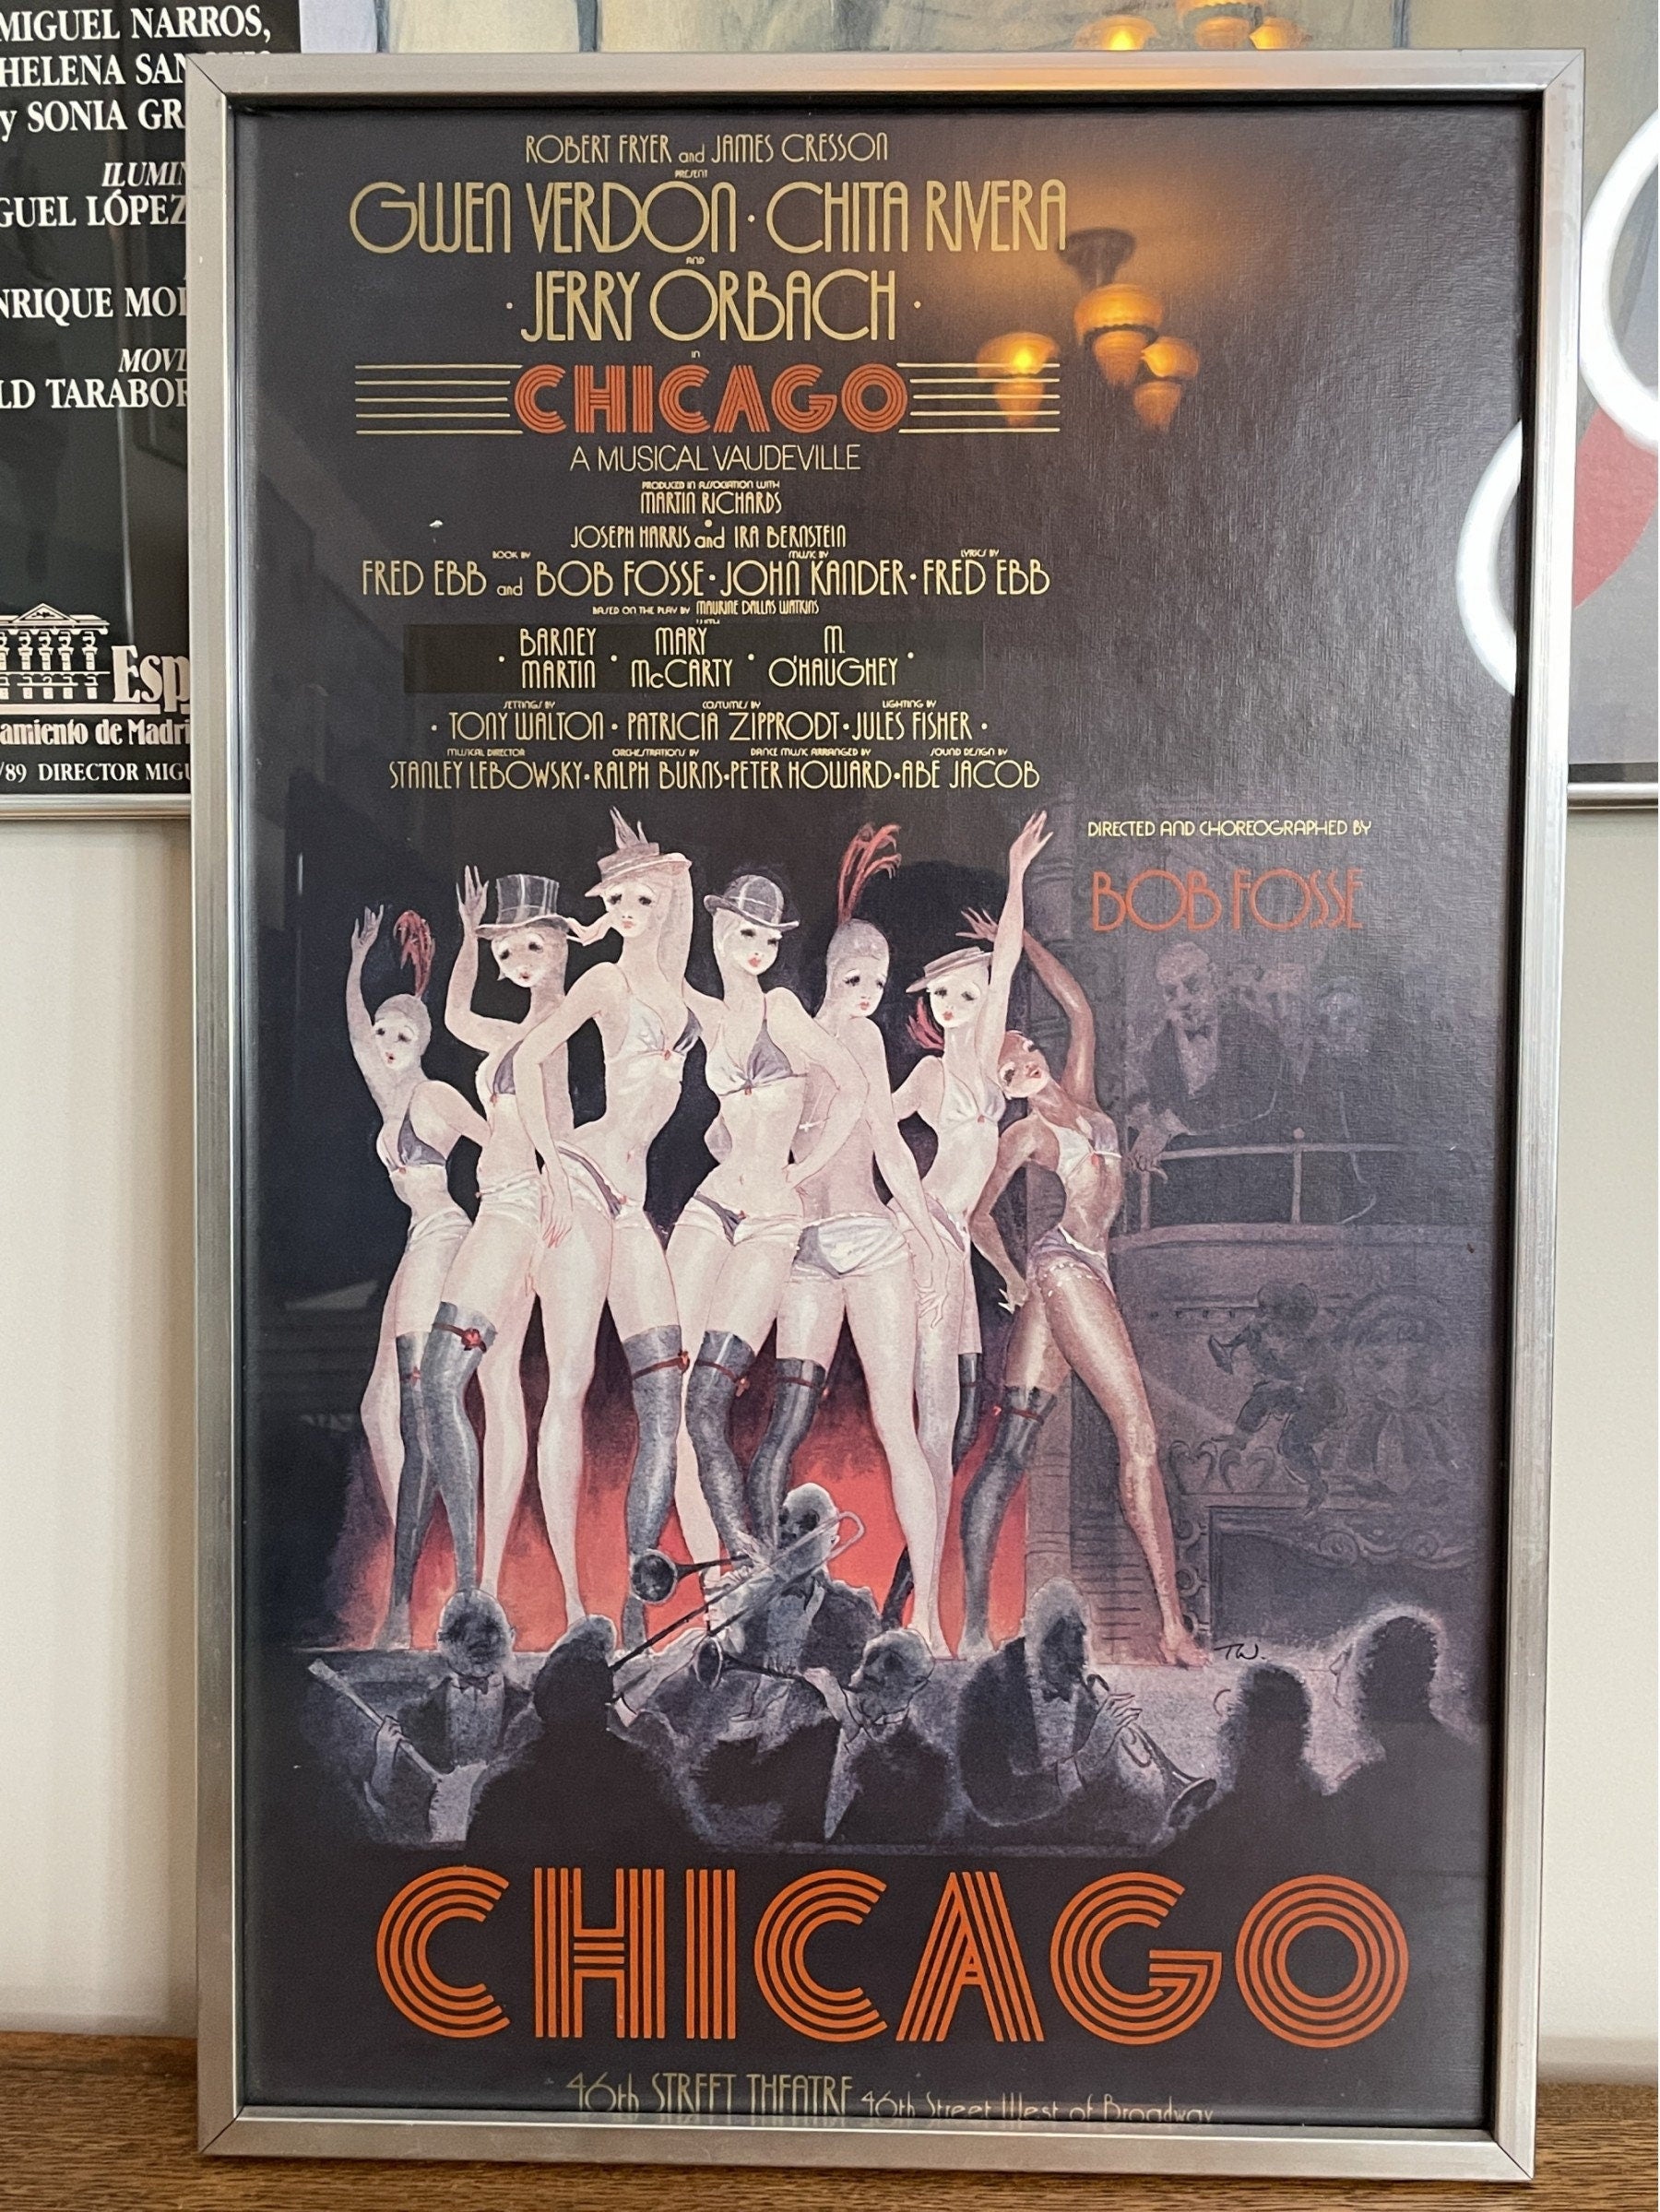 Framed Original Vintage 1975 Broadway Musical Poster of "Chicago" at The 46th St Theatre, NYC 14" x 22" | Living Room Gallery Wall Decor